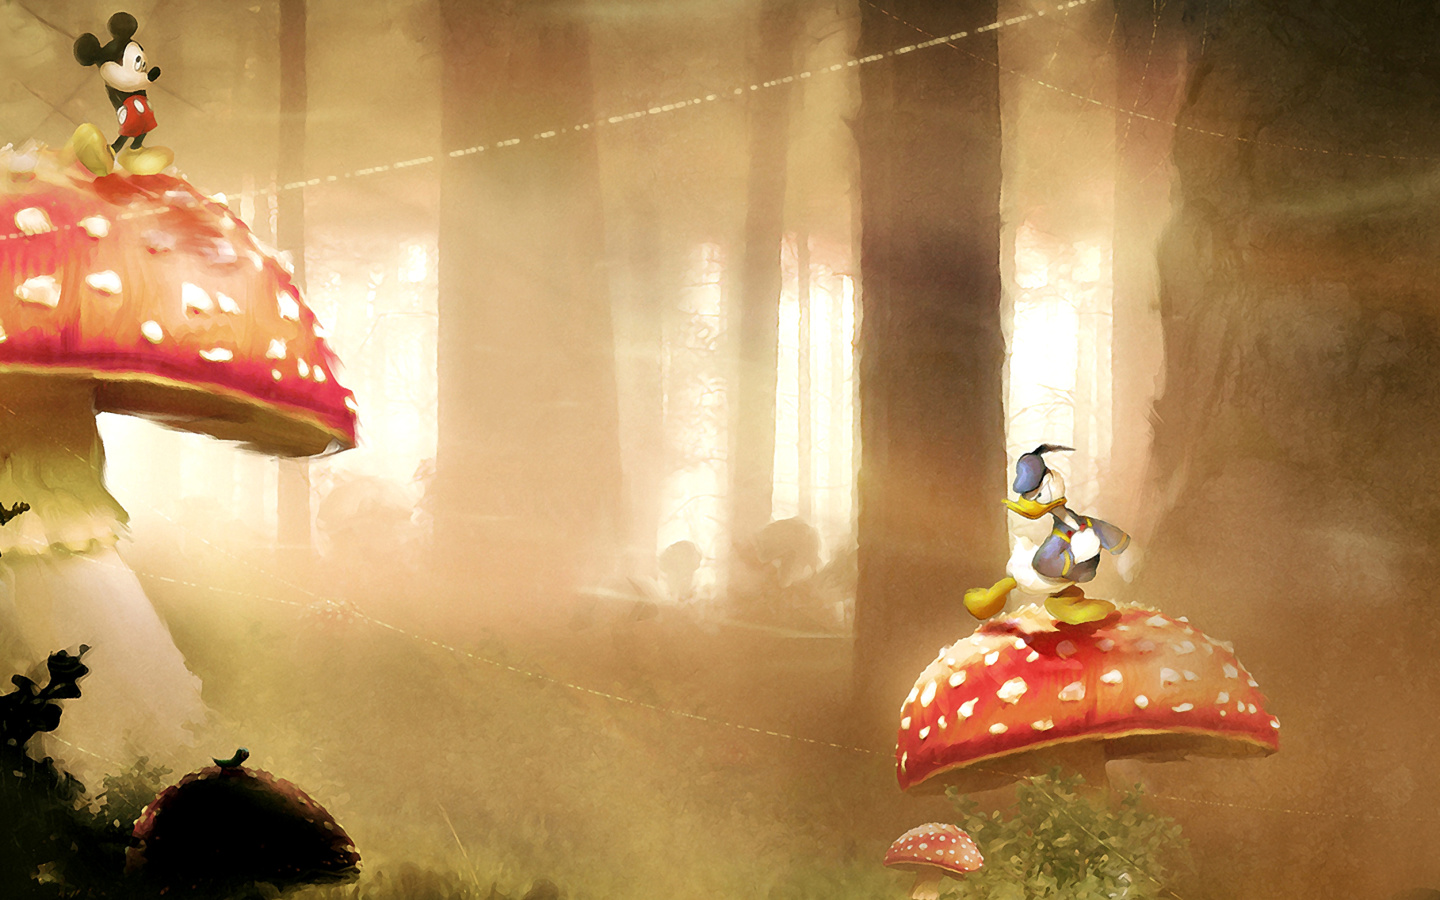 Das Mickey Mouse and Donald Duck Wallpaper 1440x900